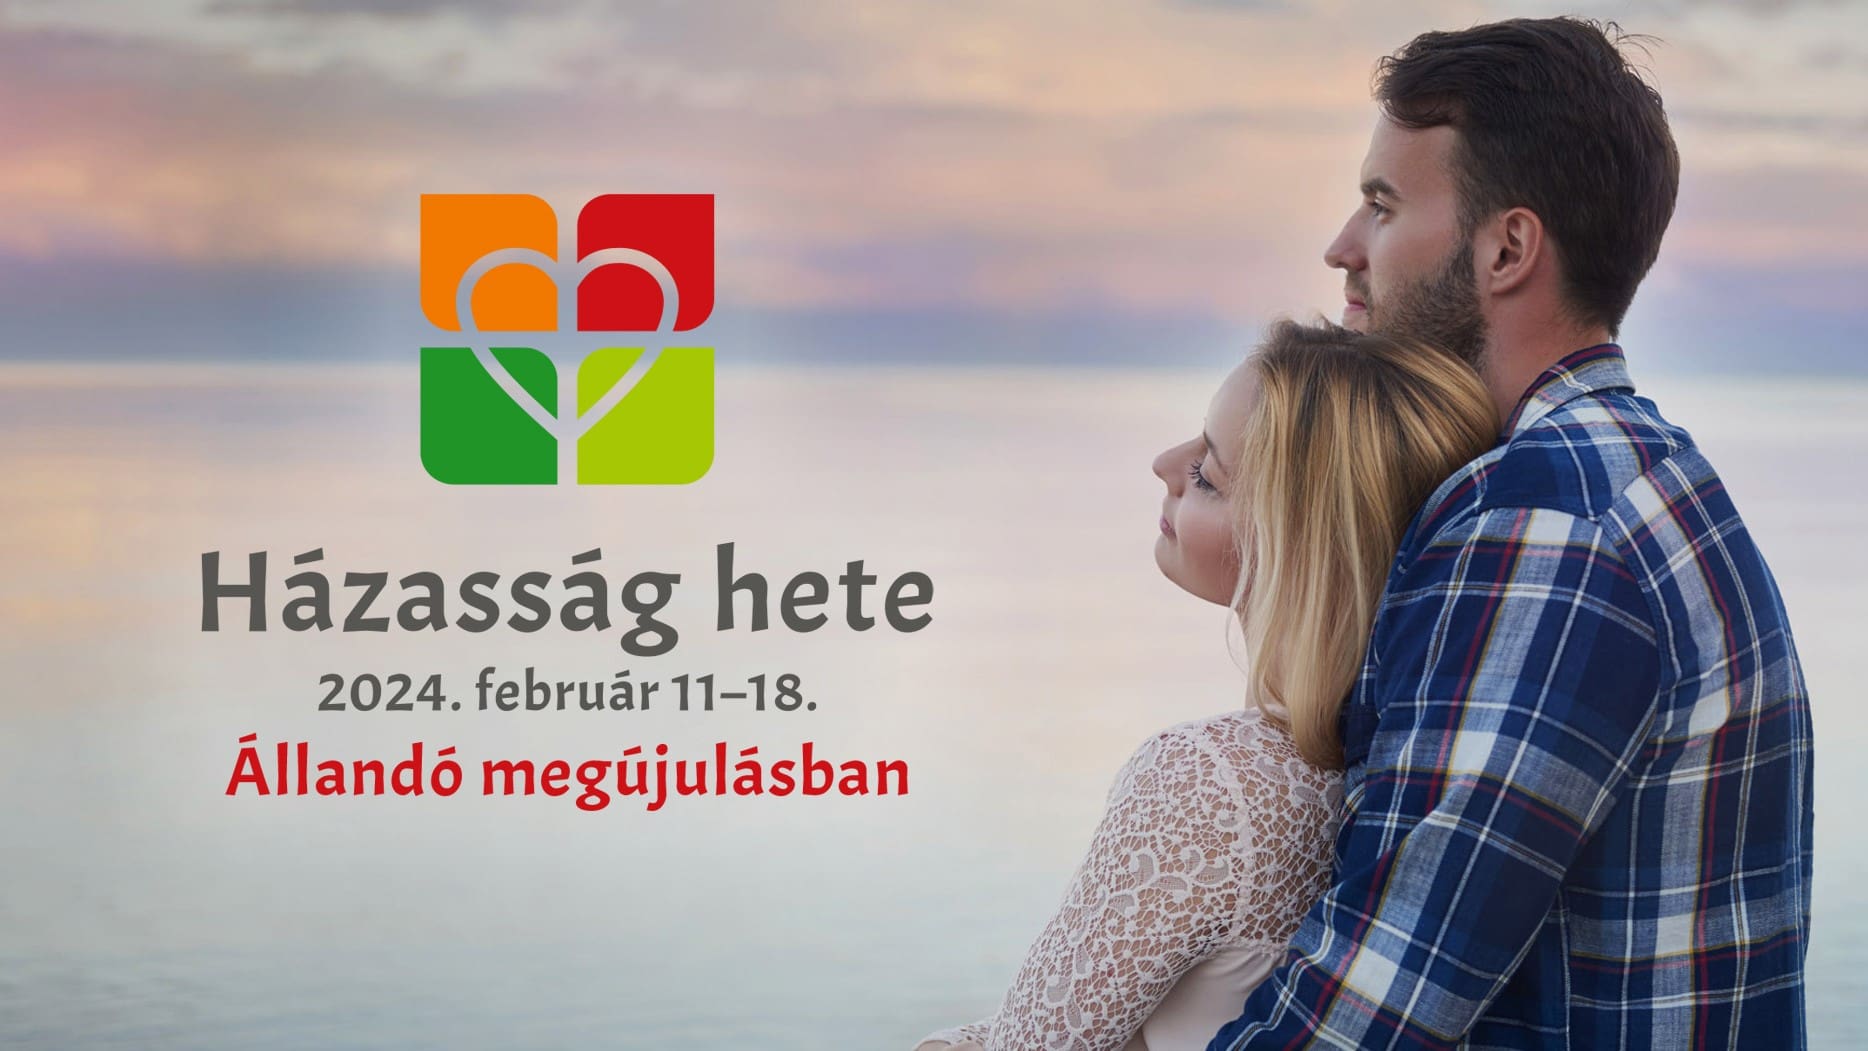 Marriage Week 2024 Hungary official campaign poster